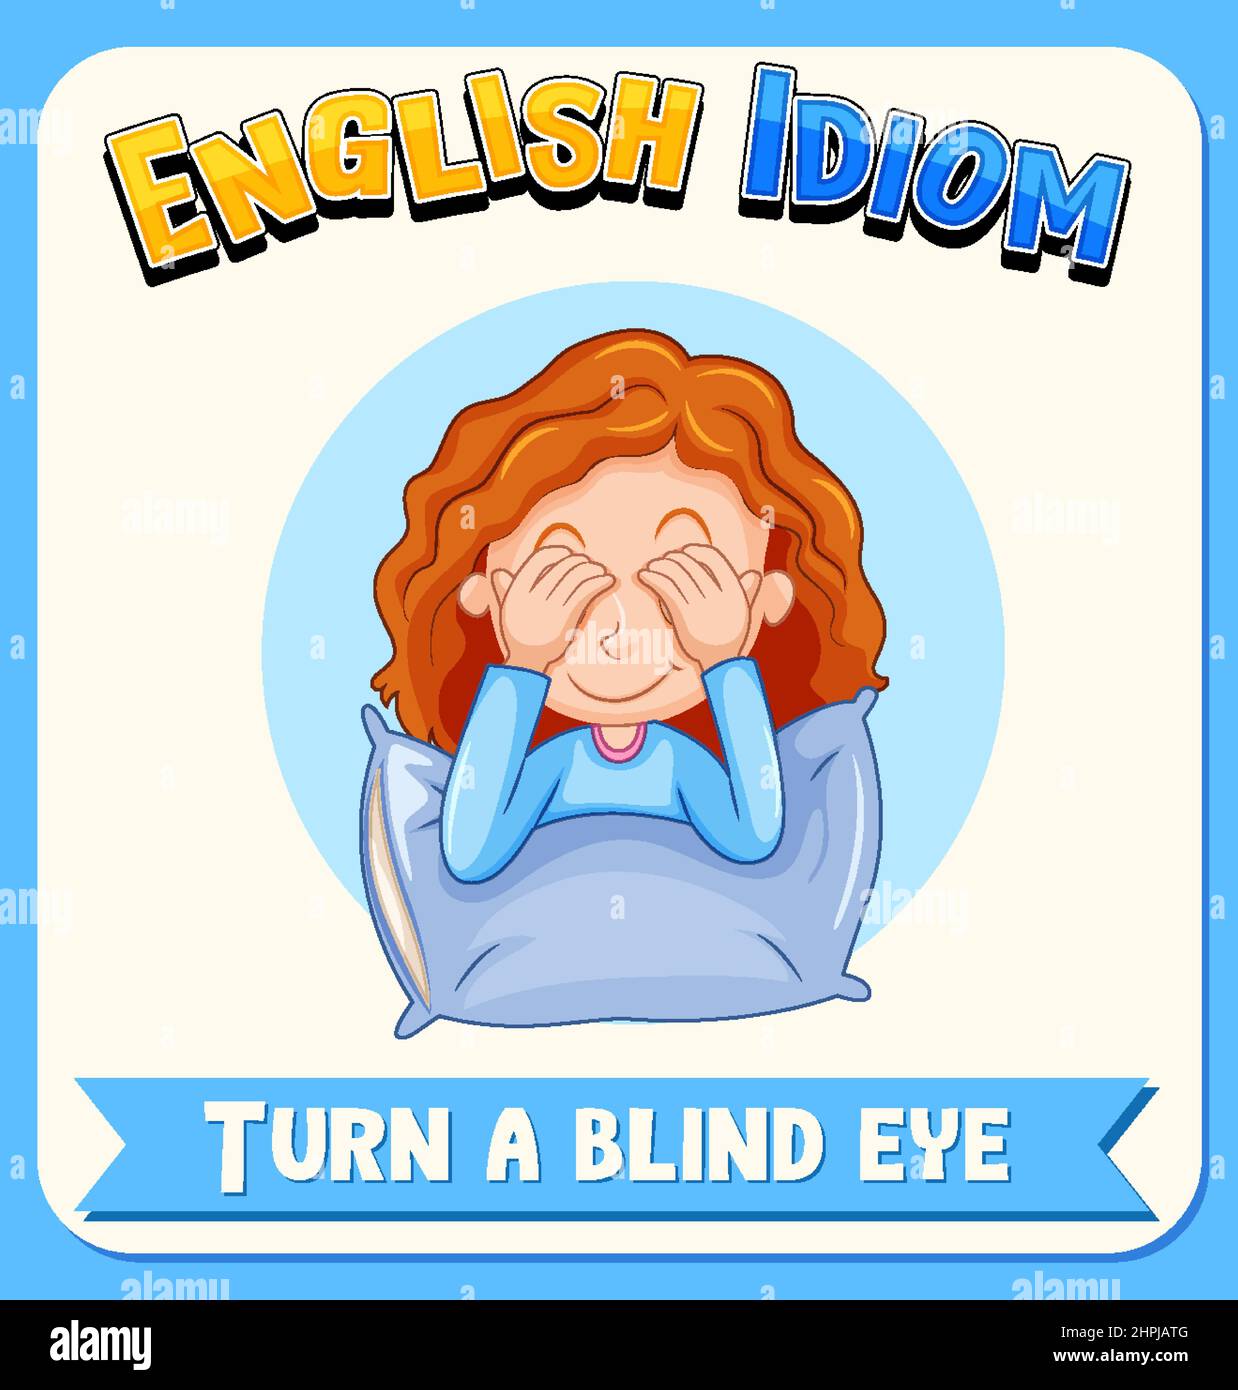 English idiom with picture description for turn a blind eye illustration Stock Vector